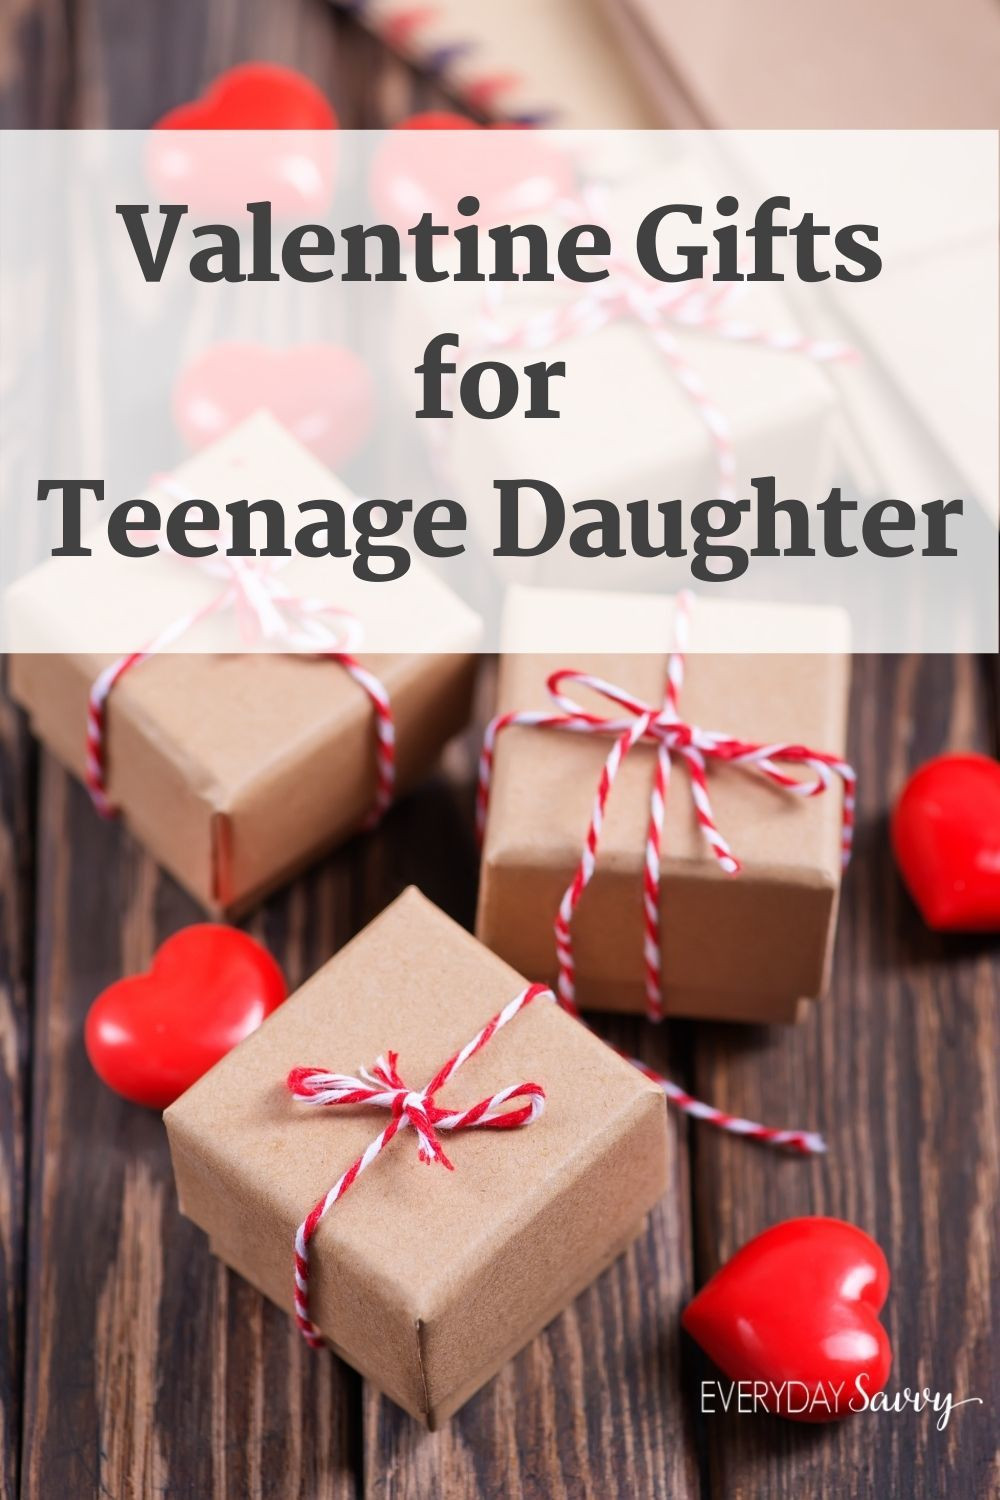 Valentines Gift Ideas For Daughter
 Valentine s Day Gifts for Teenage Daughter Everyday Savvy